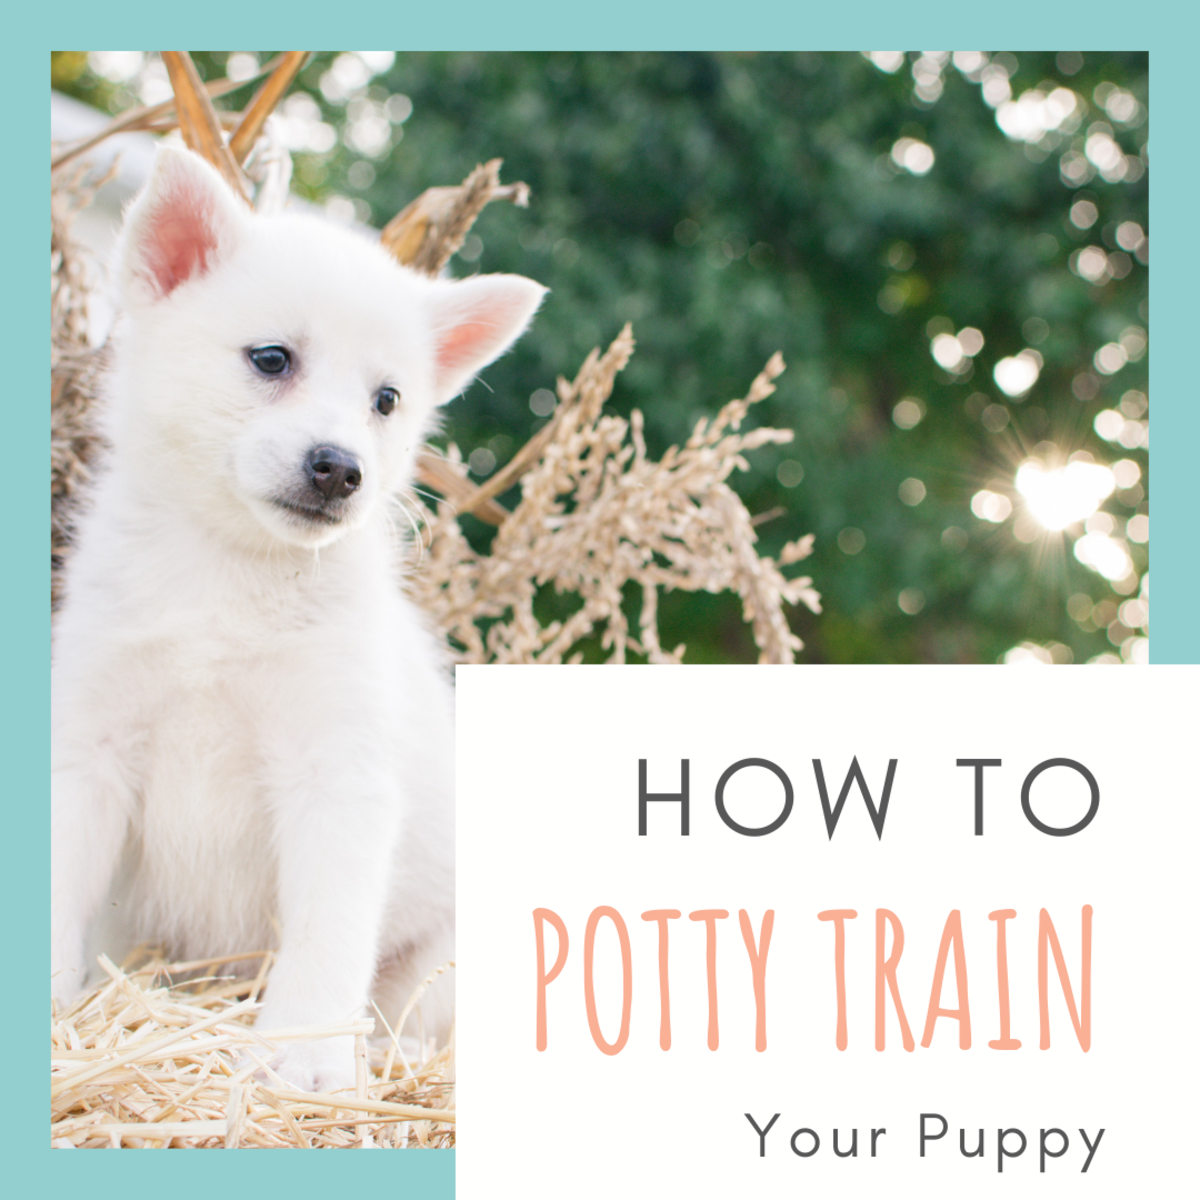 How to Housebreak a Puppy - PetHelpful - By fellow animal lovers and experts